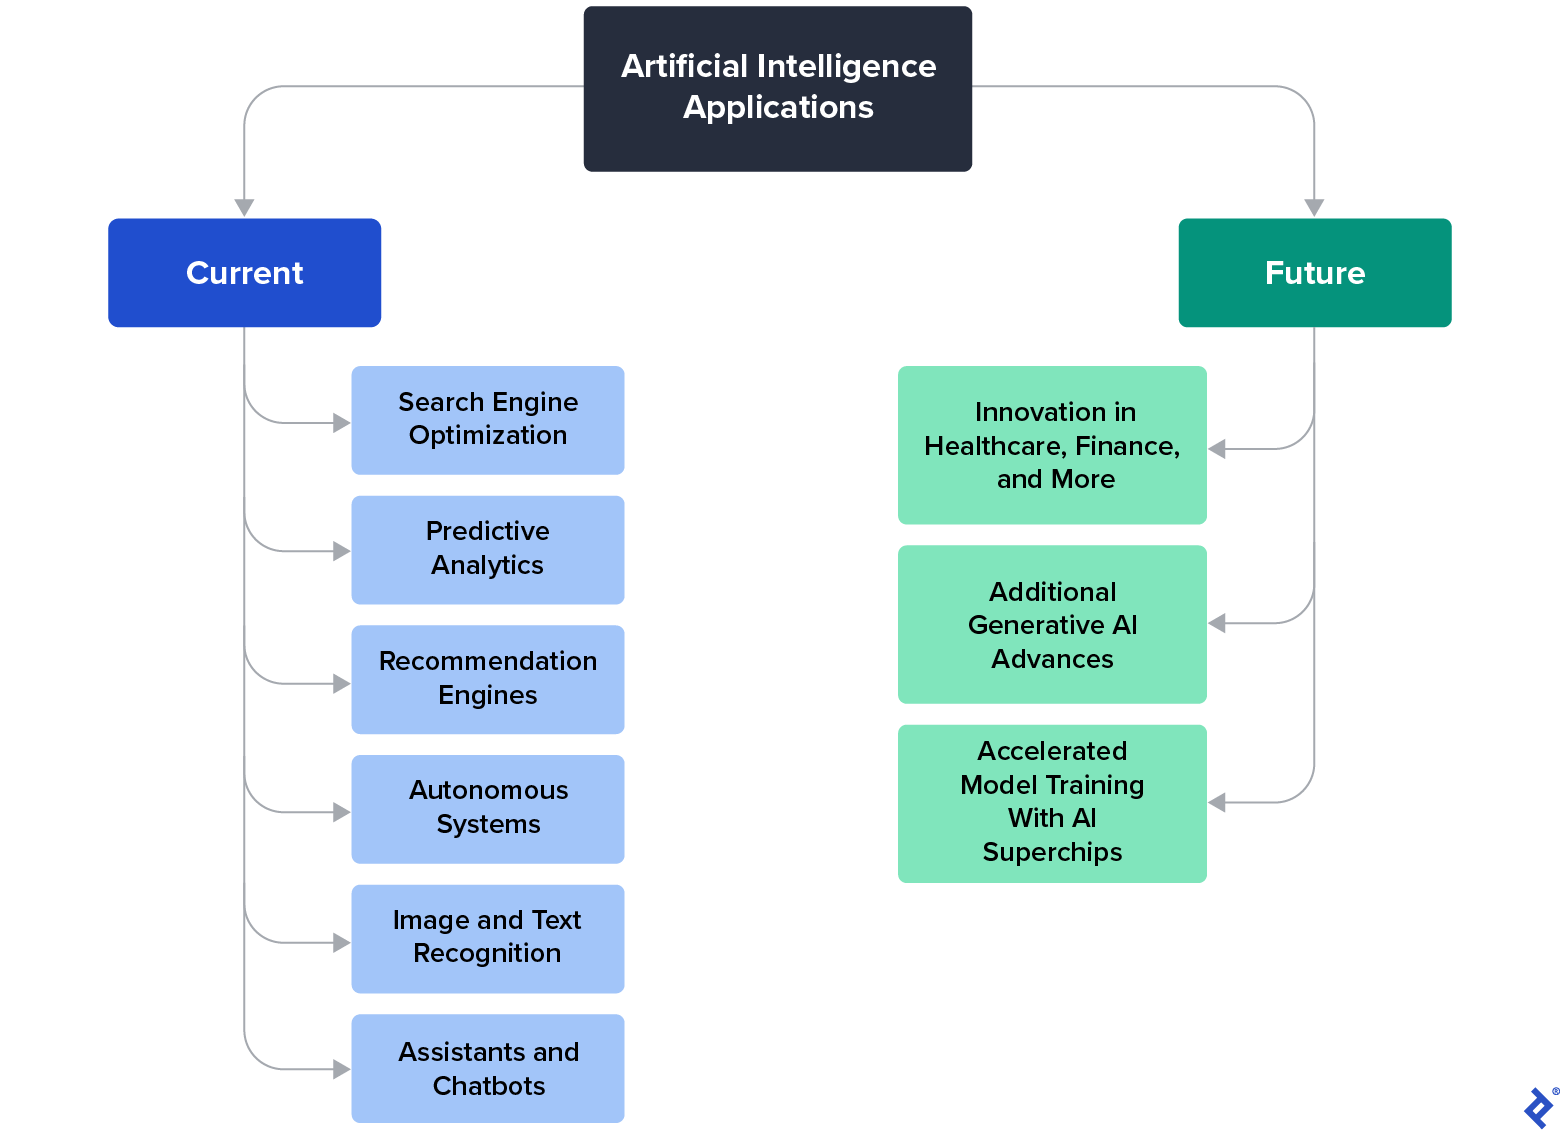 A chart of AI’s current applications, such as SEO and chatbots, and future applications, such as healthcare innovation and generative AI advances.